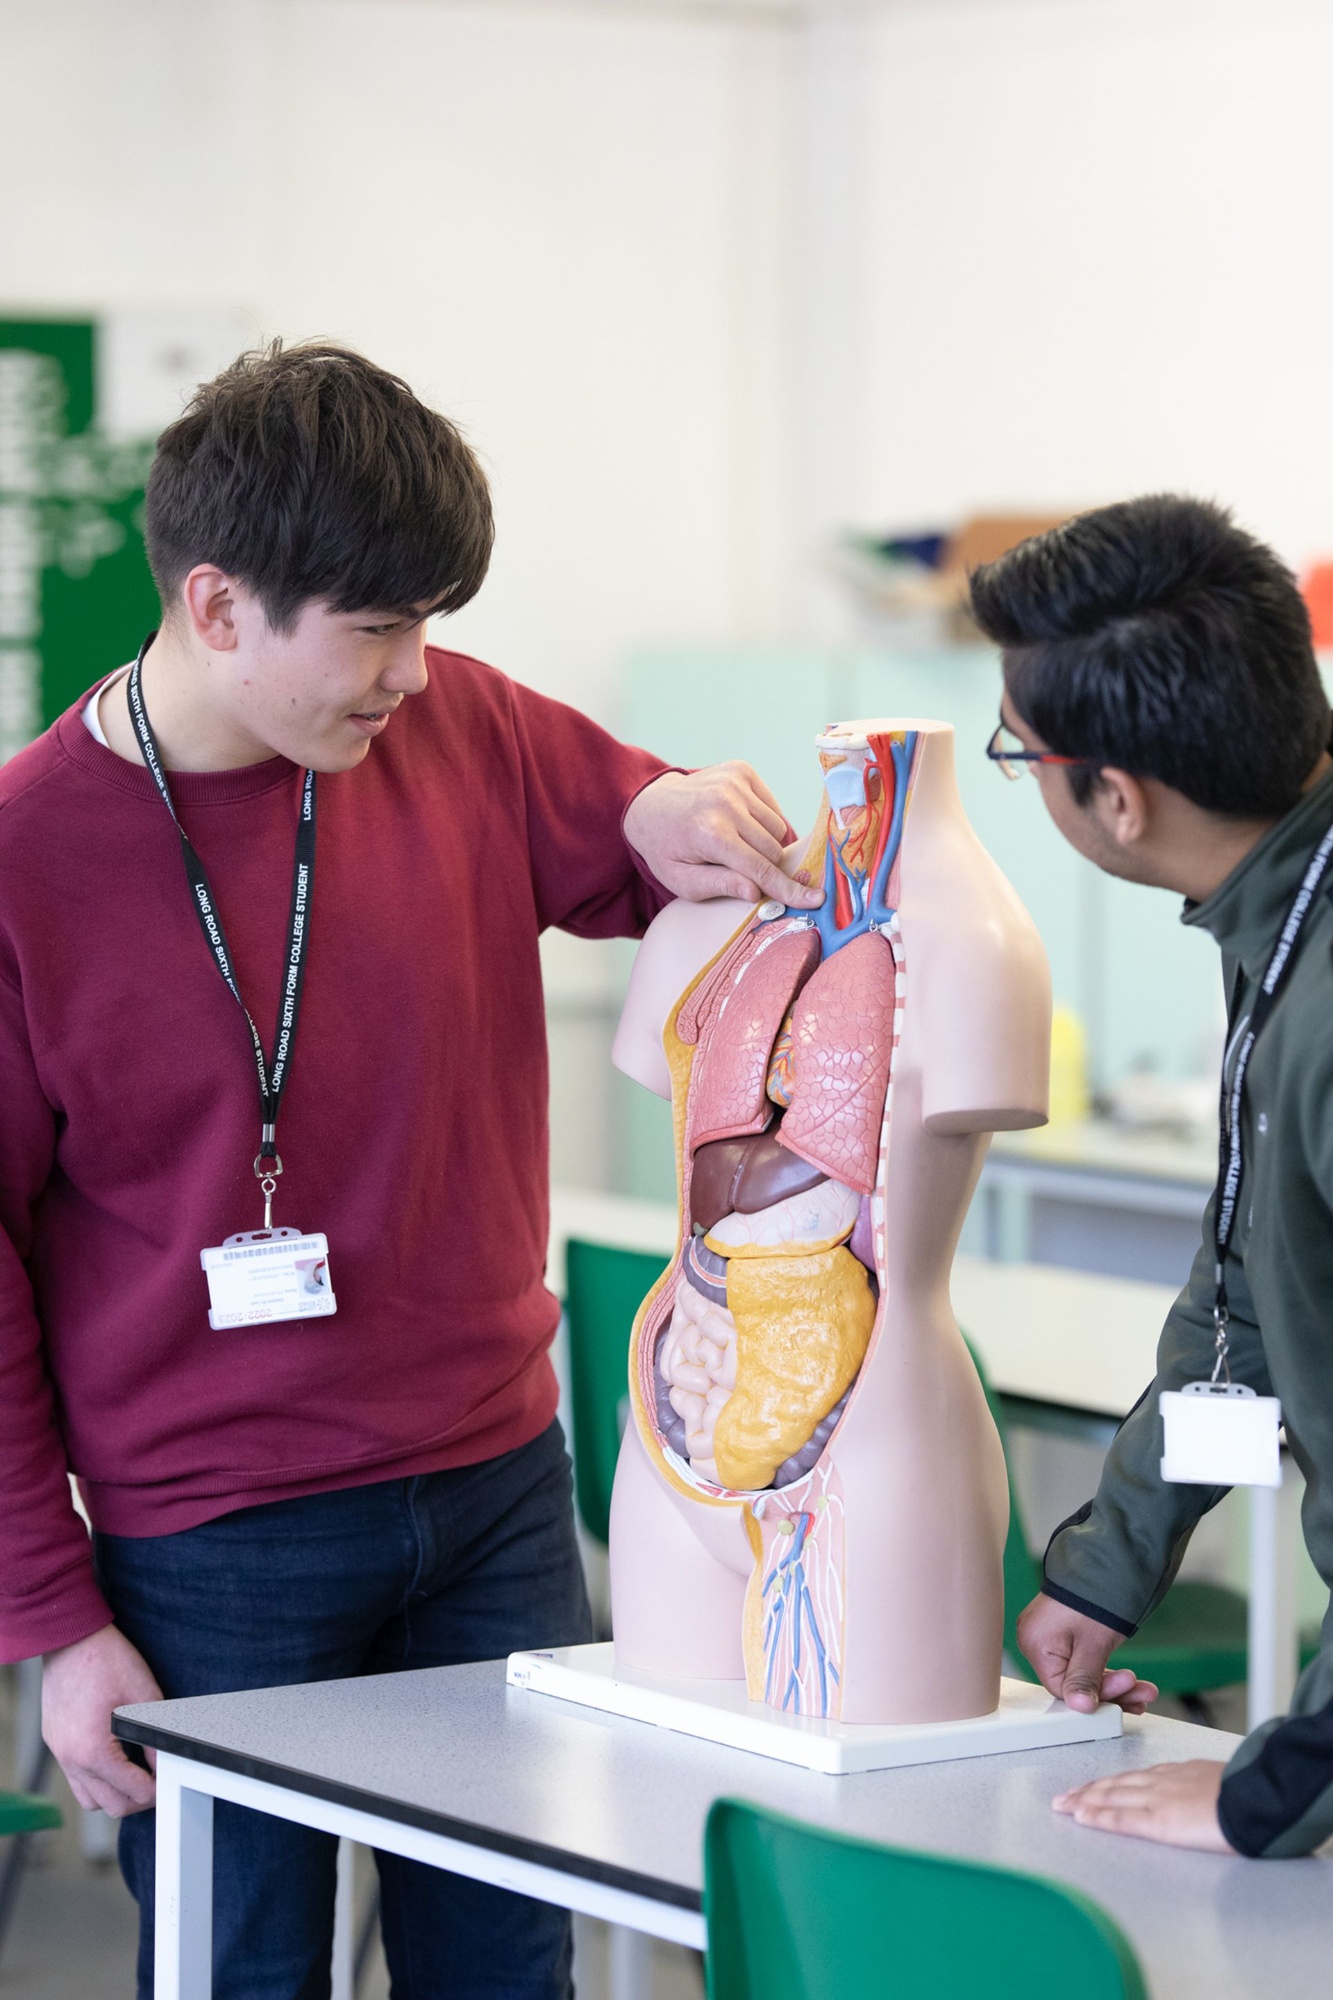 Two male students in a science lab looking at a model of the human body, showing internal organs